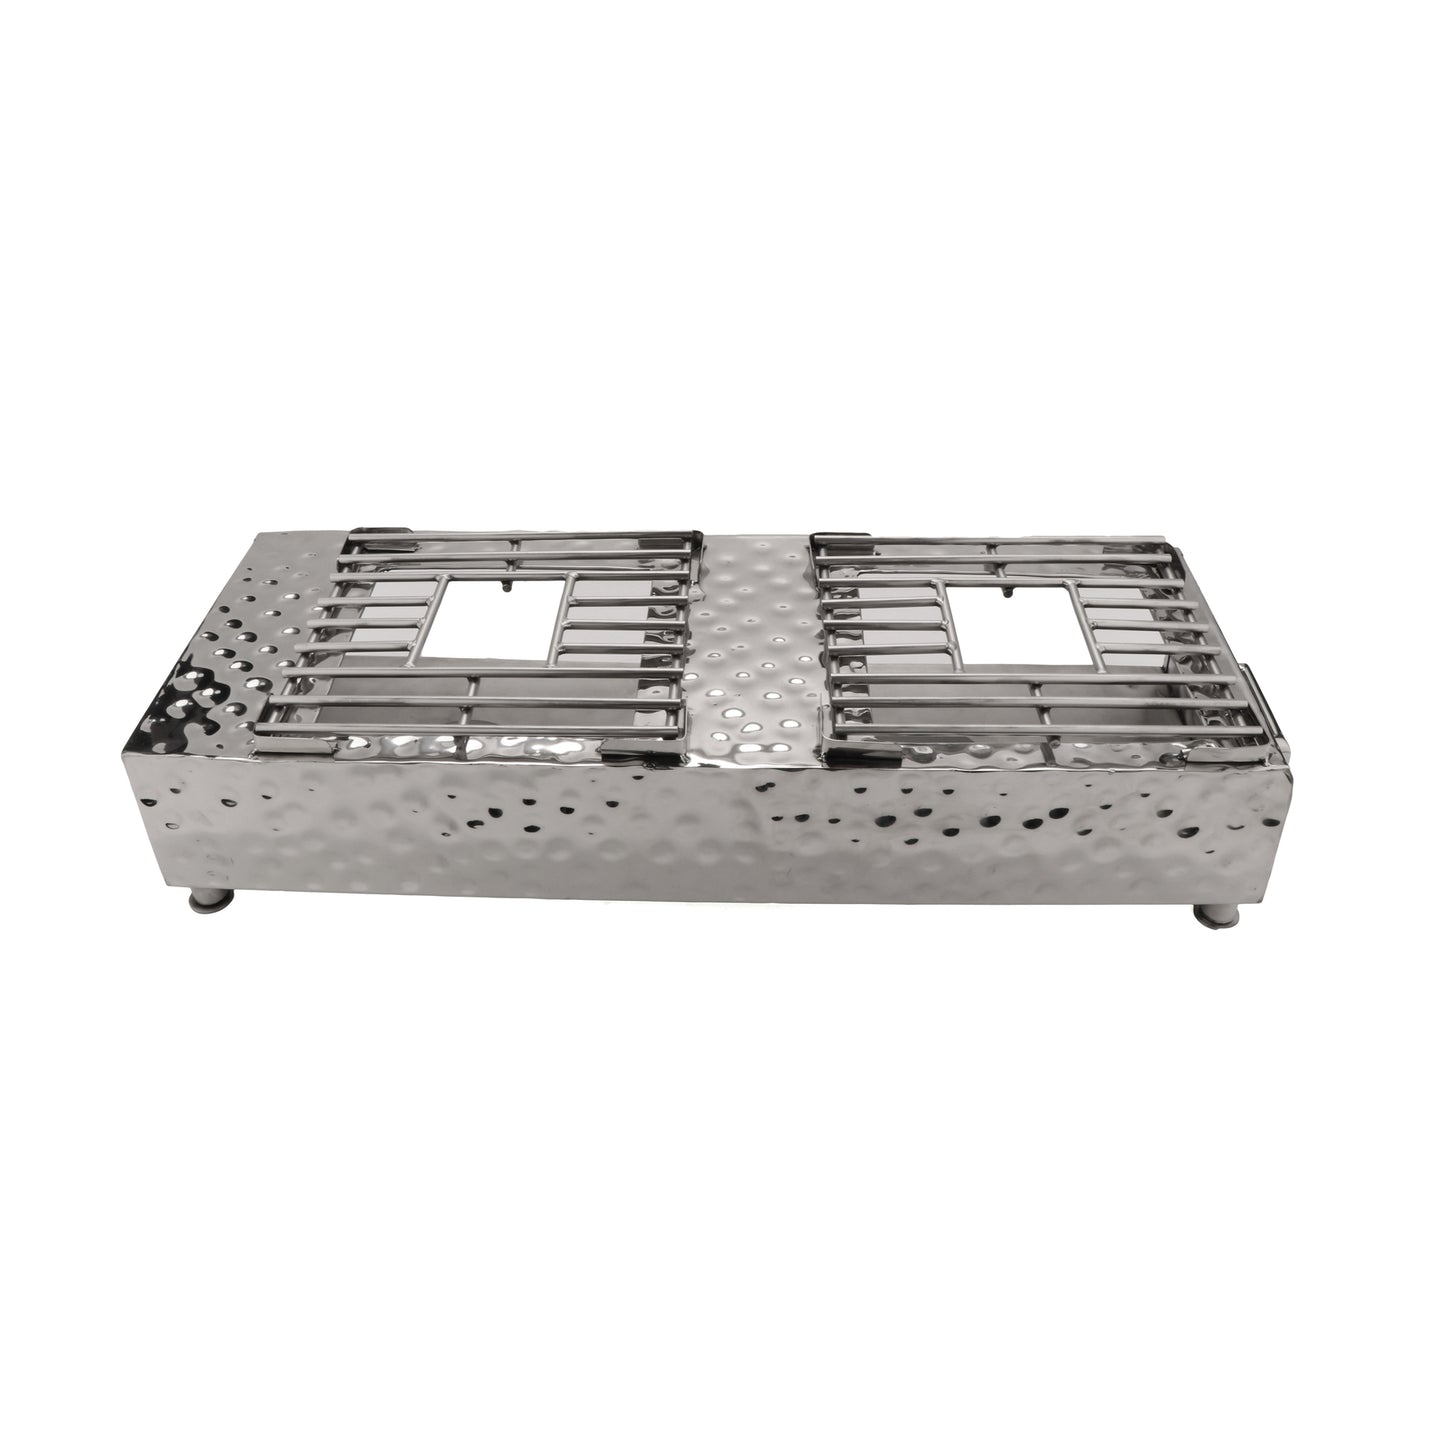 Pounded Stainless Steel Double Burner Cover